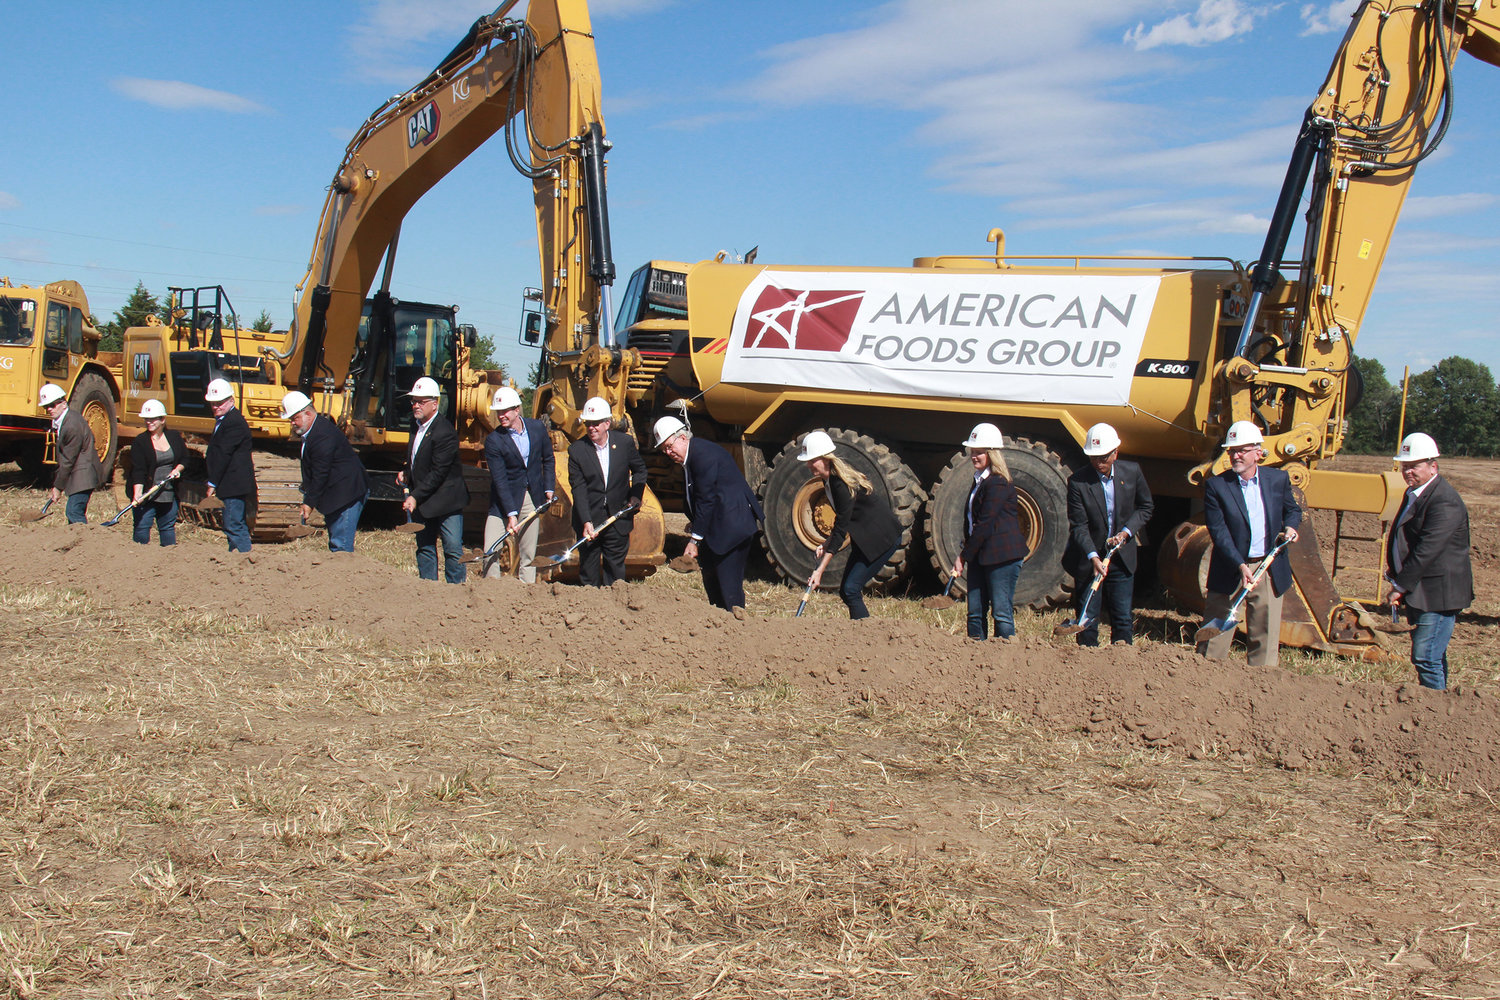 Delegates representing American Foods Group, Warren County, and regional economic development groups gathered Monday to ceremonially mark the beginning of construction for AFG's beef processing plant just west of Foristell.